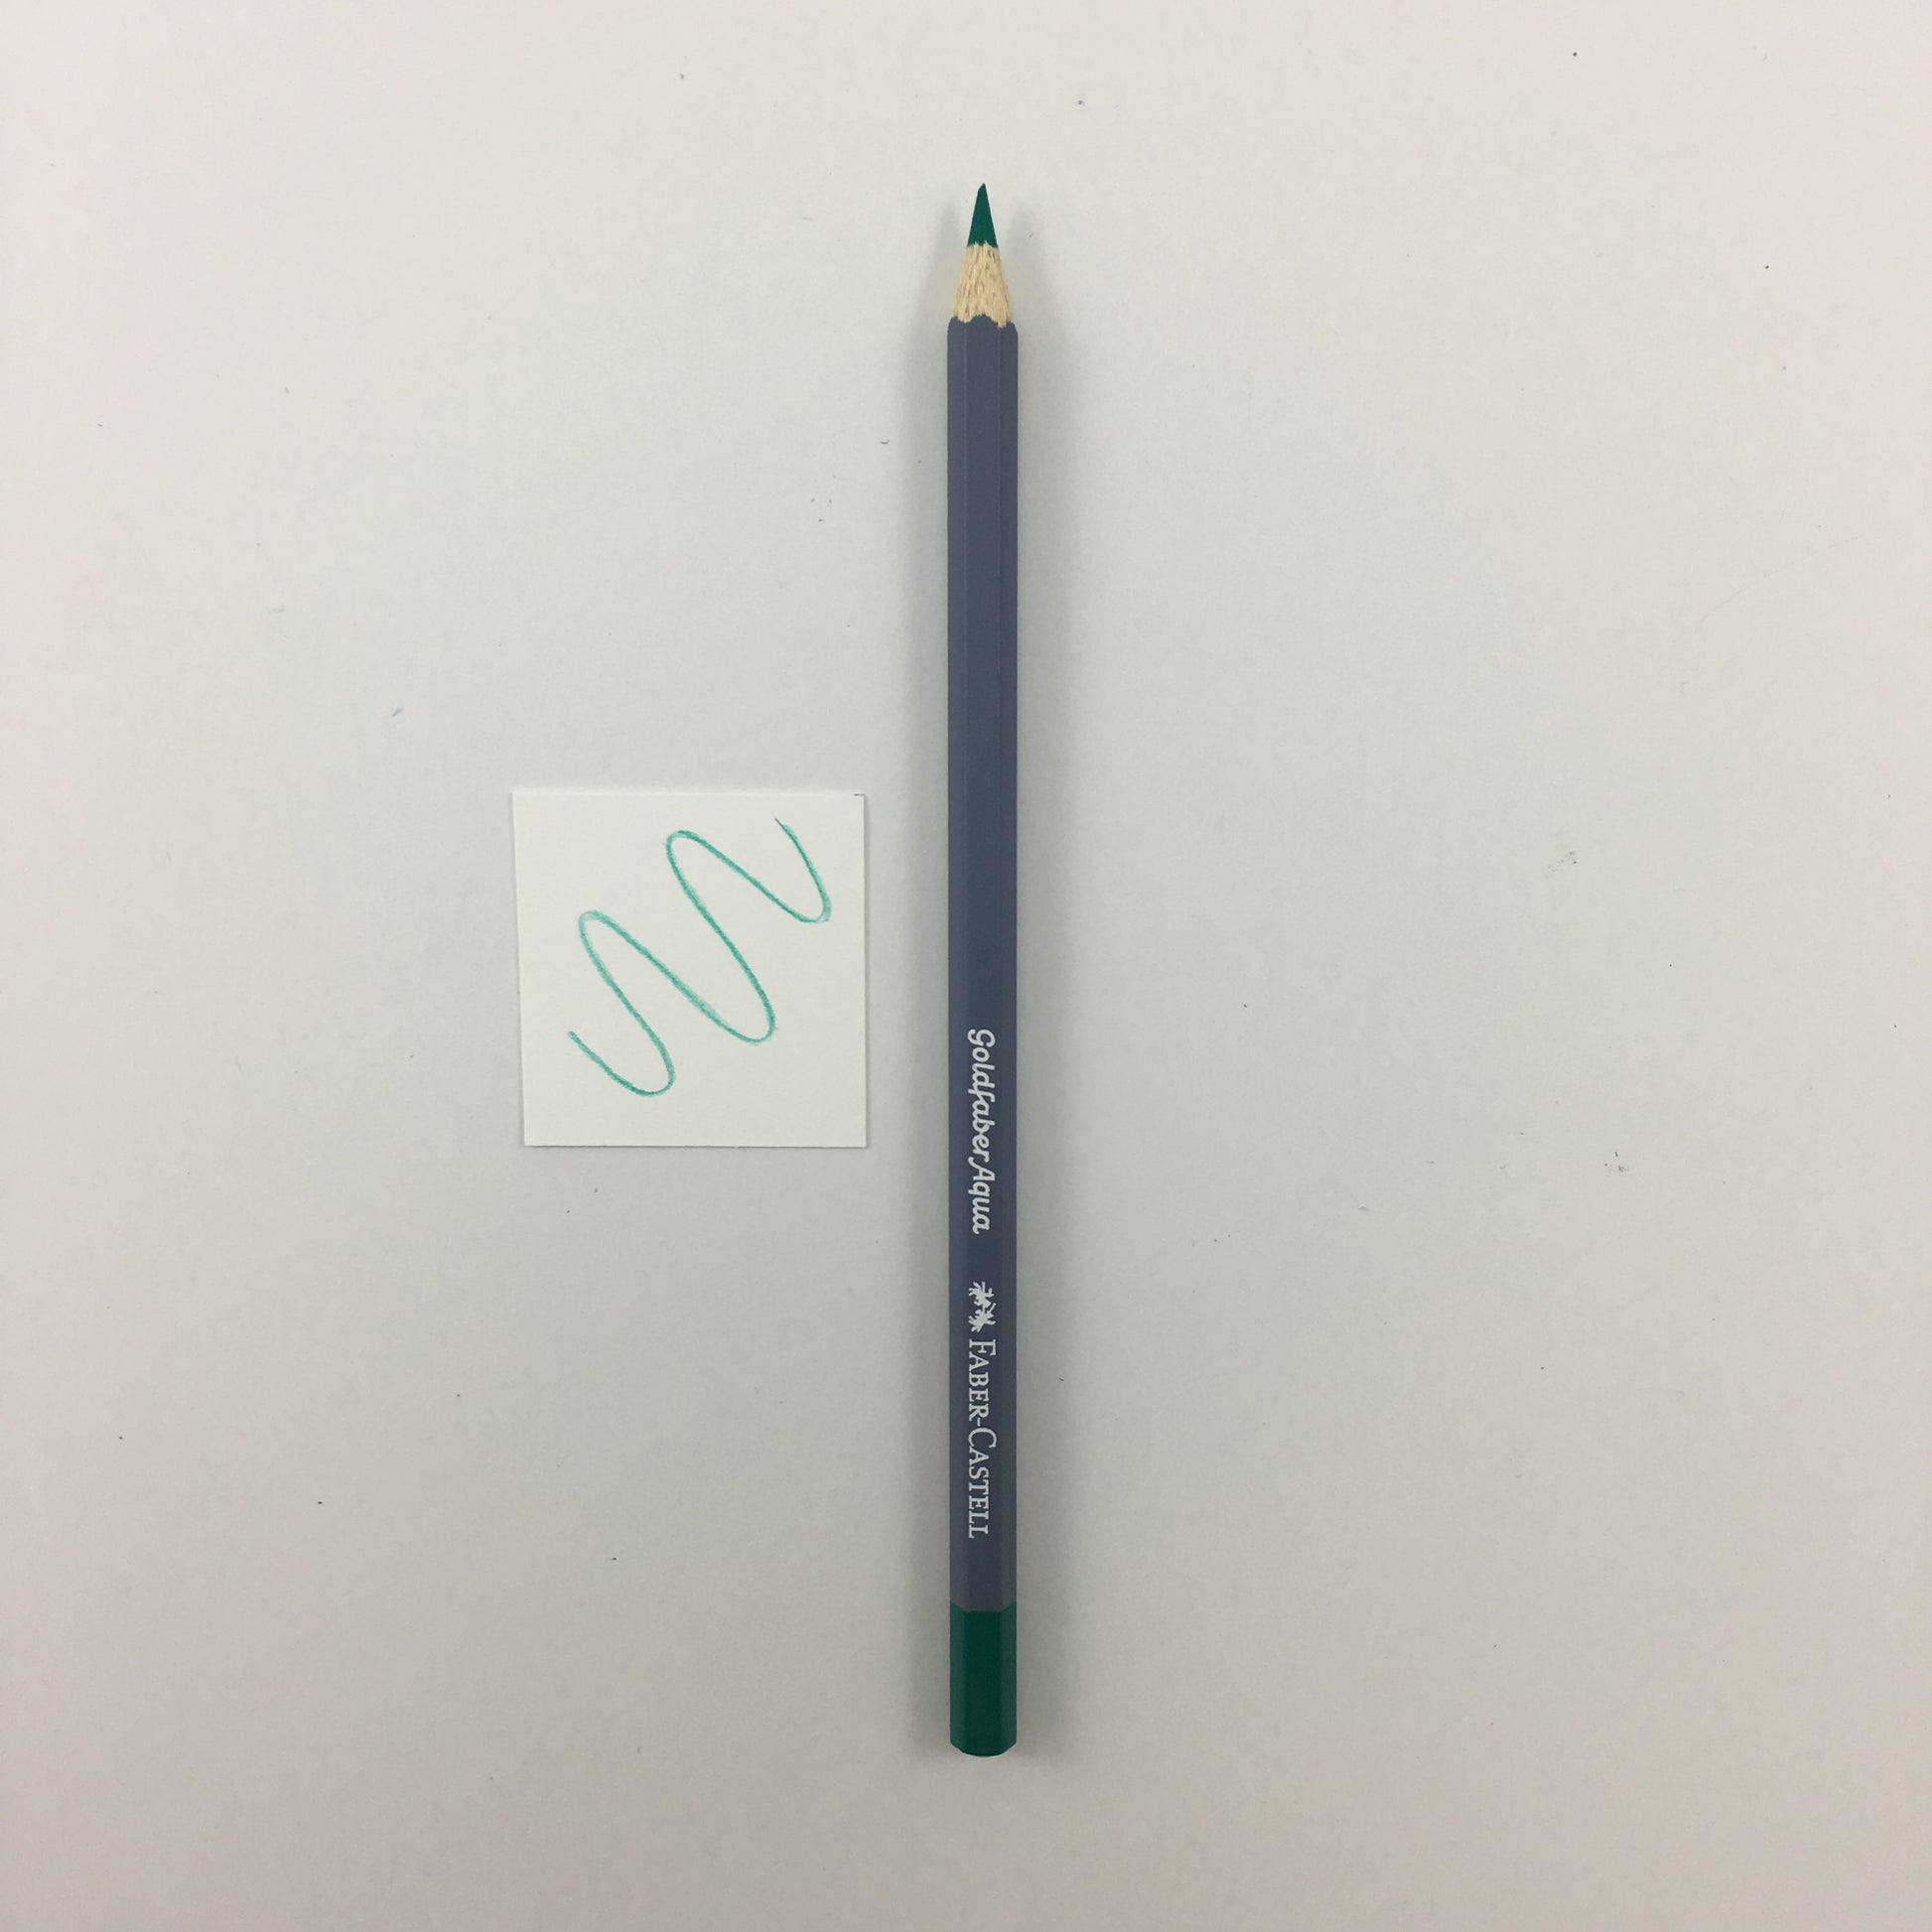 Faber-Castell Goldfaber Aqua Watercolor Pencils - Individuals - 161 - Pthalo Green by Faber-Castell - K. A. Artist Shop